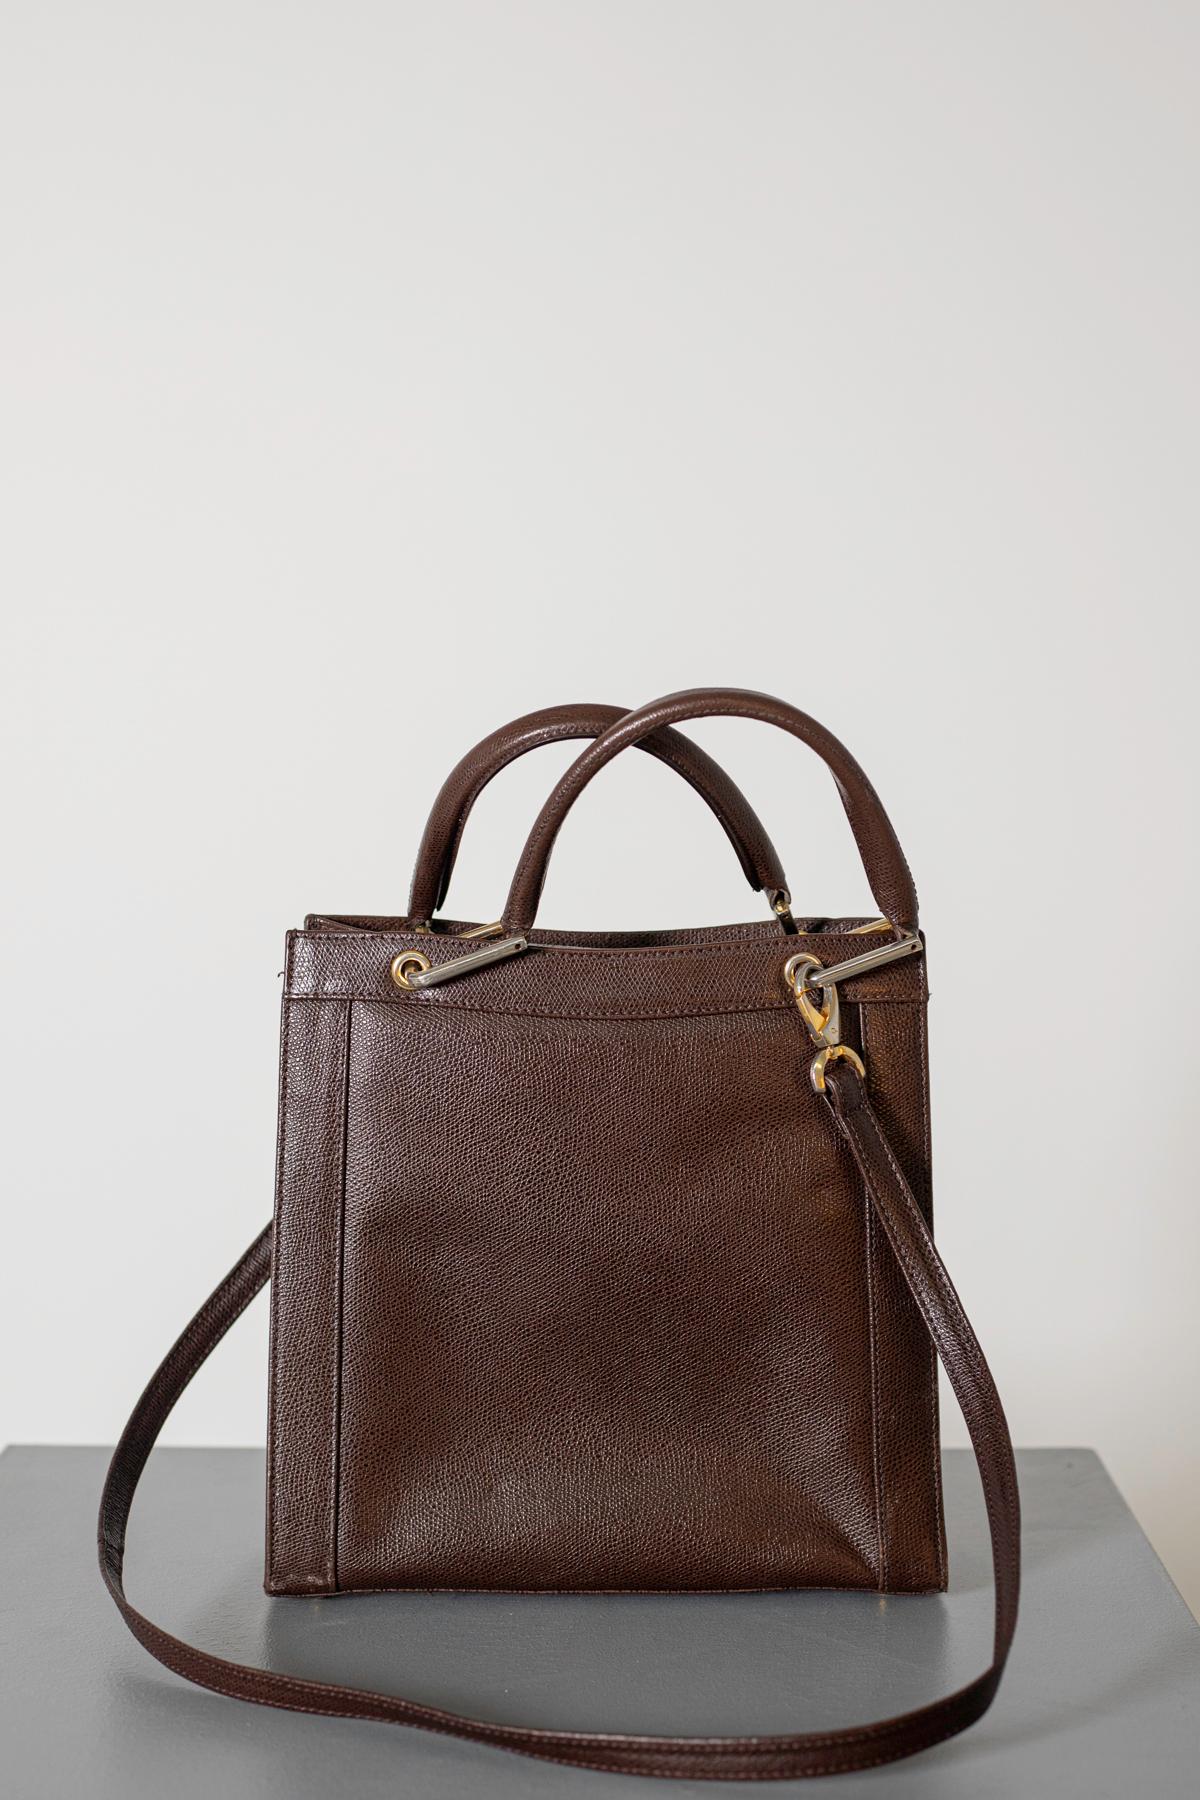 Lady italian Bag by Giorgia from 1950. Brown leather, flat leather strap, a single compartment on the underside of the front flap with magnetic snap closure. Combining great practicality and extraordinary appearance, Giorgia is the ideal solution